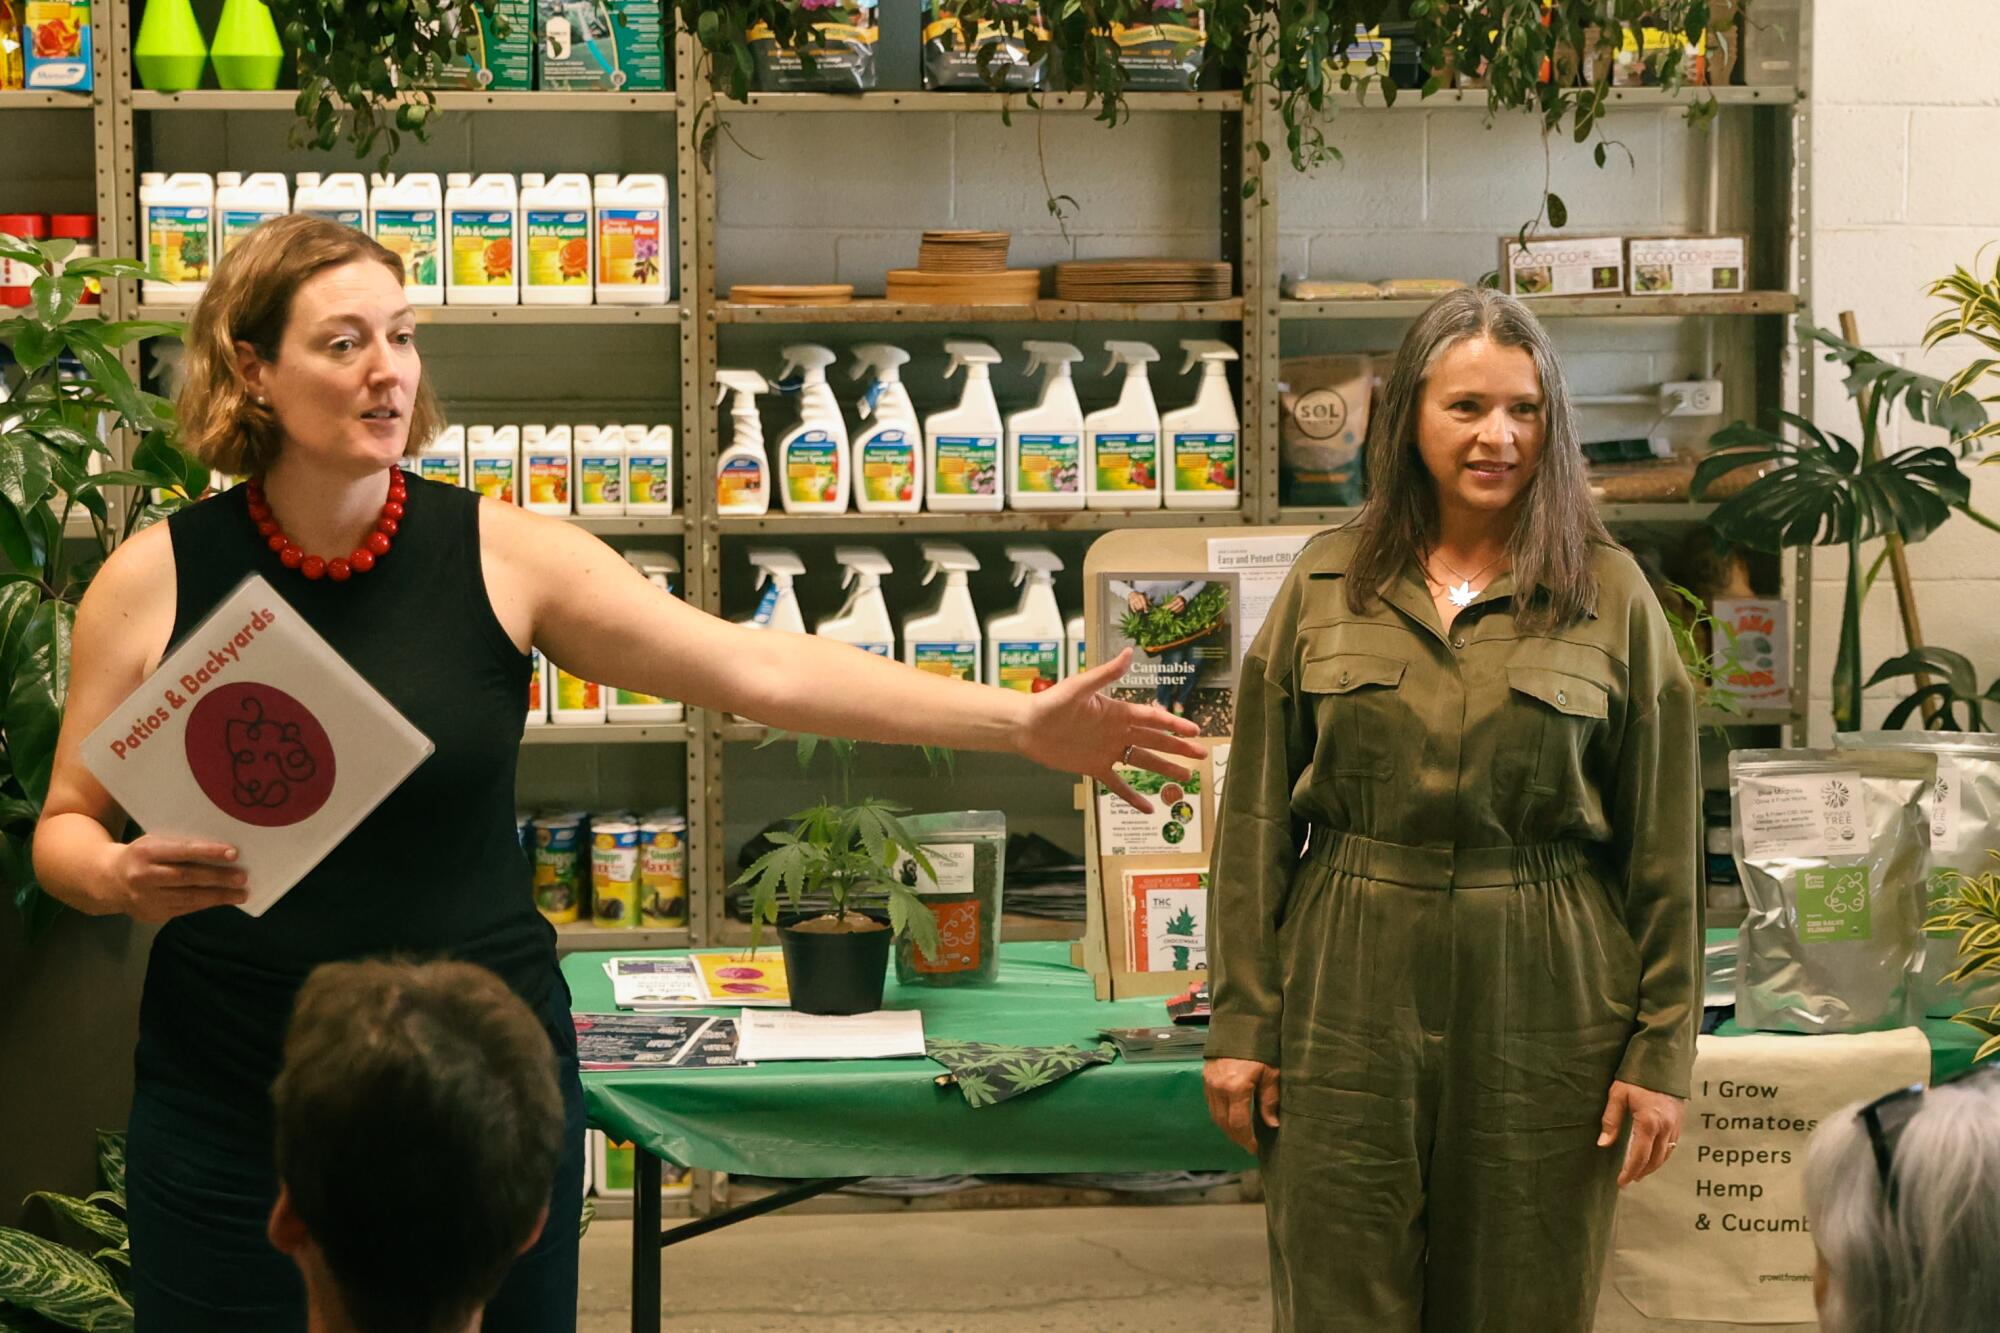 Two people standing in a gardening center surrounded by gardening supplies.